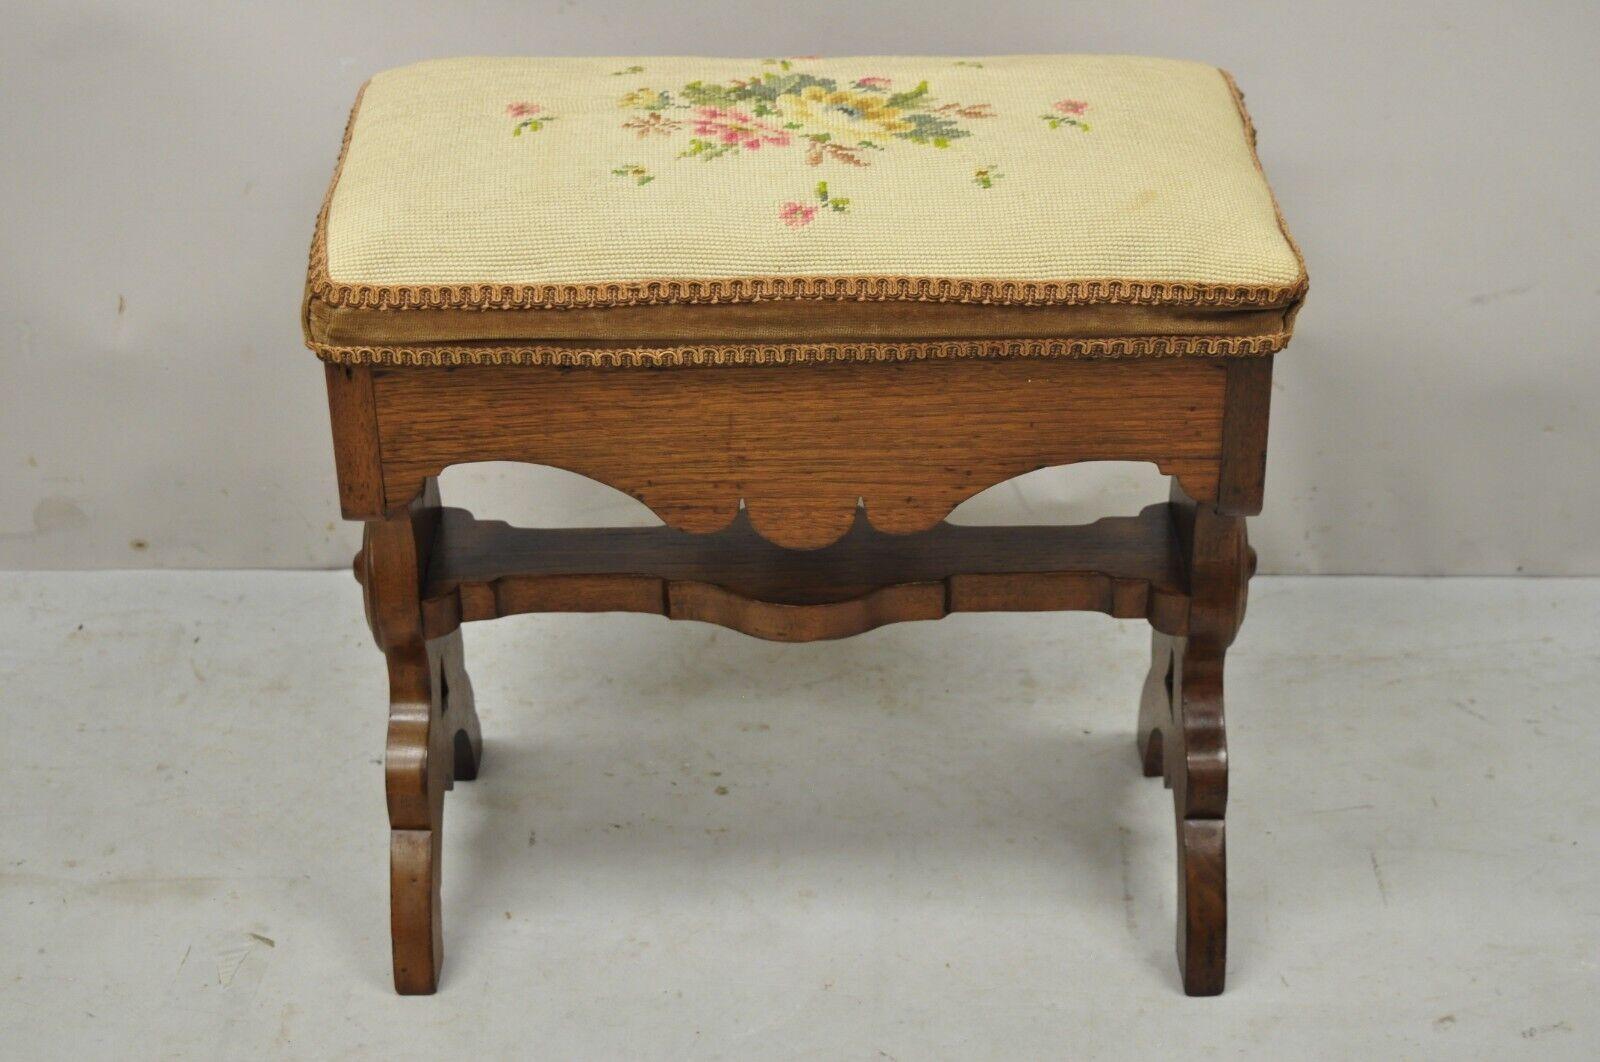 Antique Eastlake Victorian carved walnut stool bench with needlepoint seat. Item features a needlepoint seat, stretcher base, solid wood frame, beautiful woodgrain, nicely carved details, very nice antique item. Circa19th century. Measurements: 18